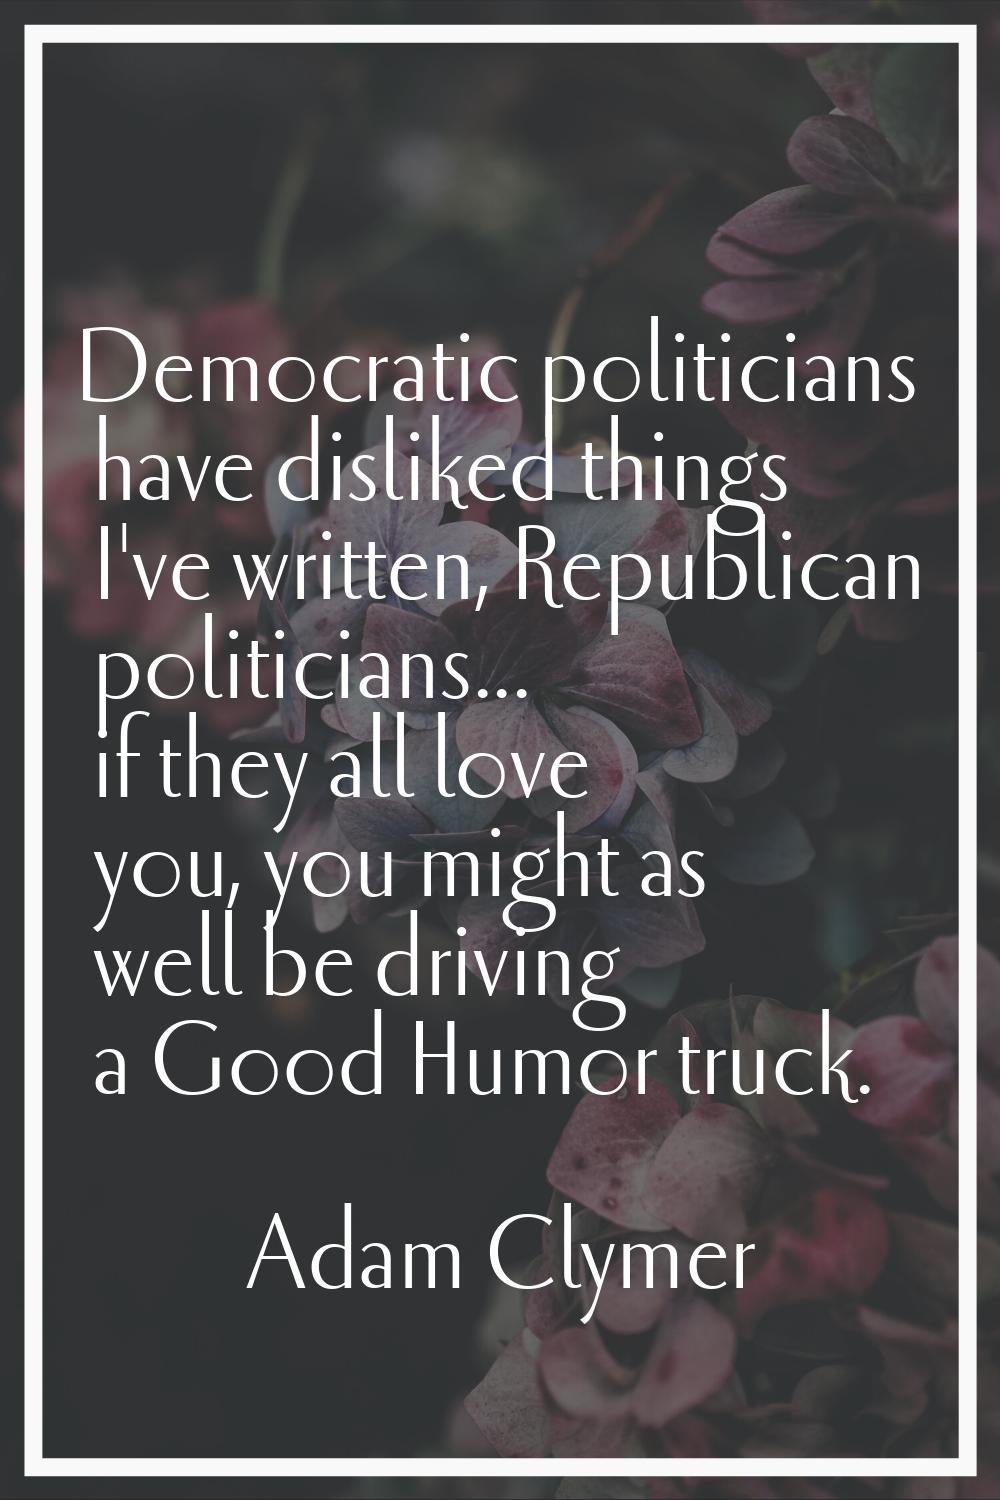 Democratic politicians have disliked things I've written, Republican politicians... if they all lov